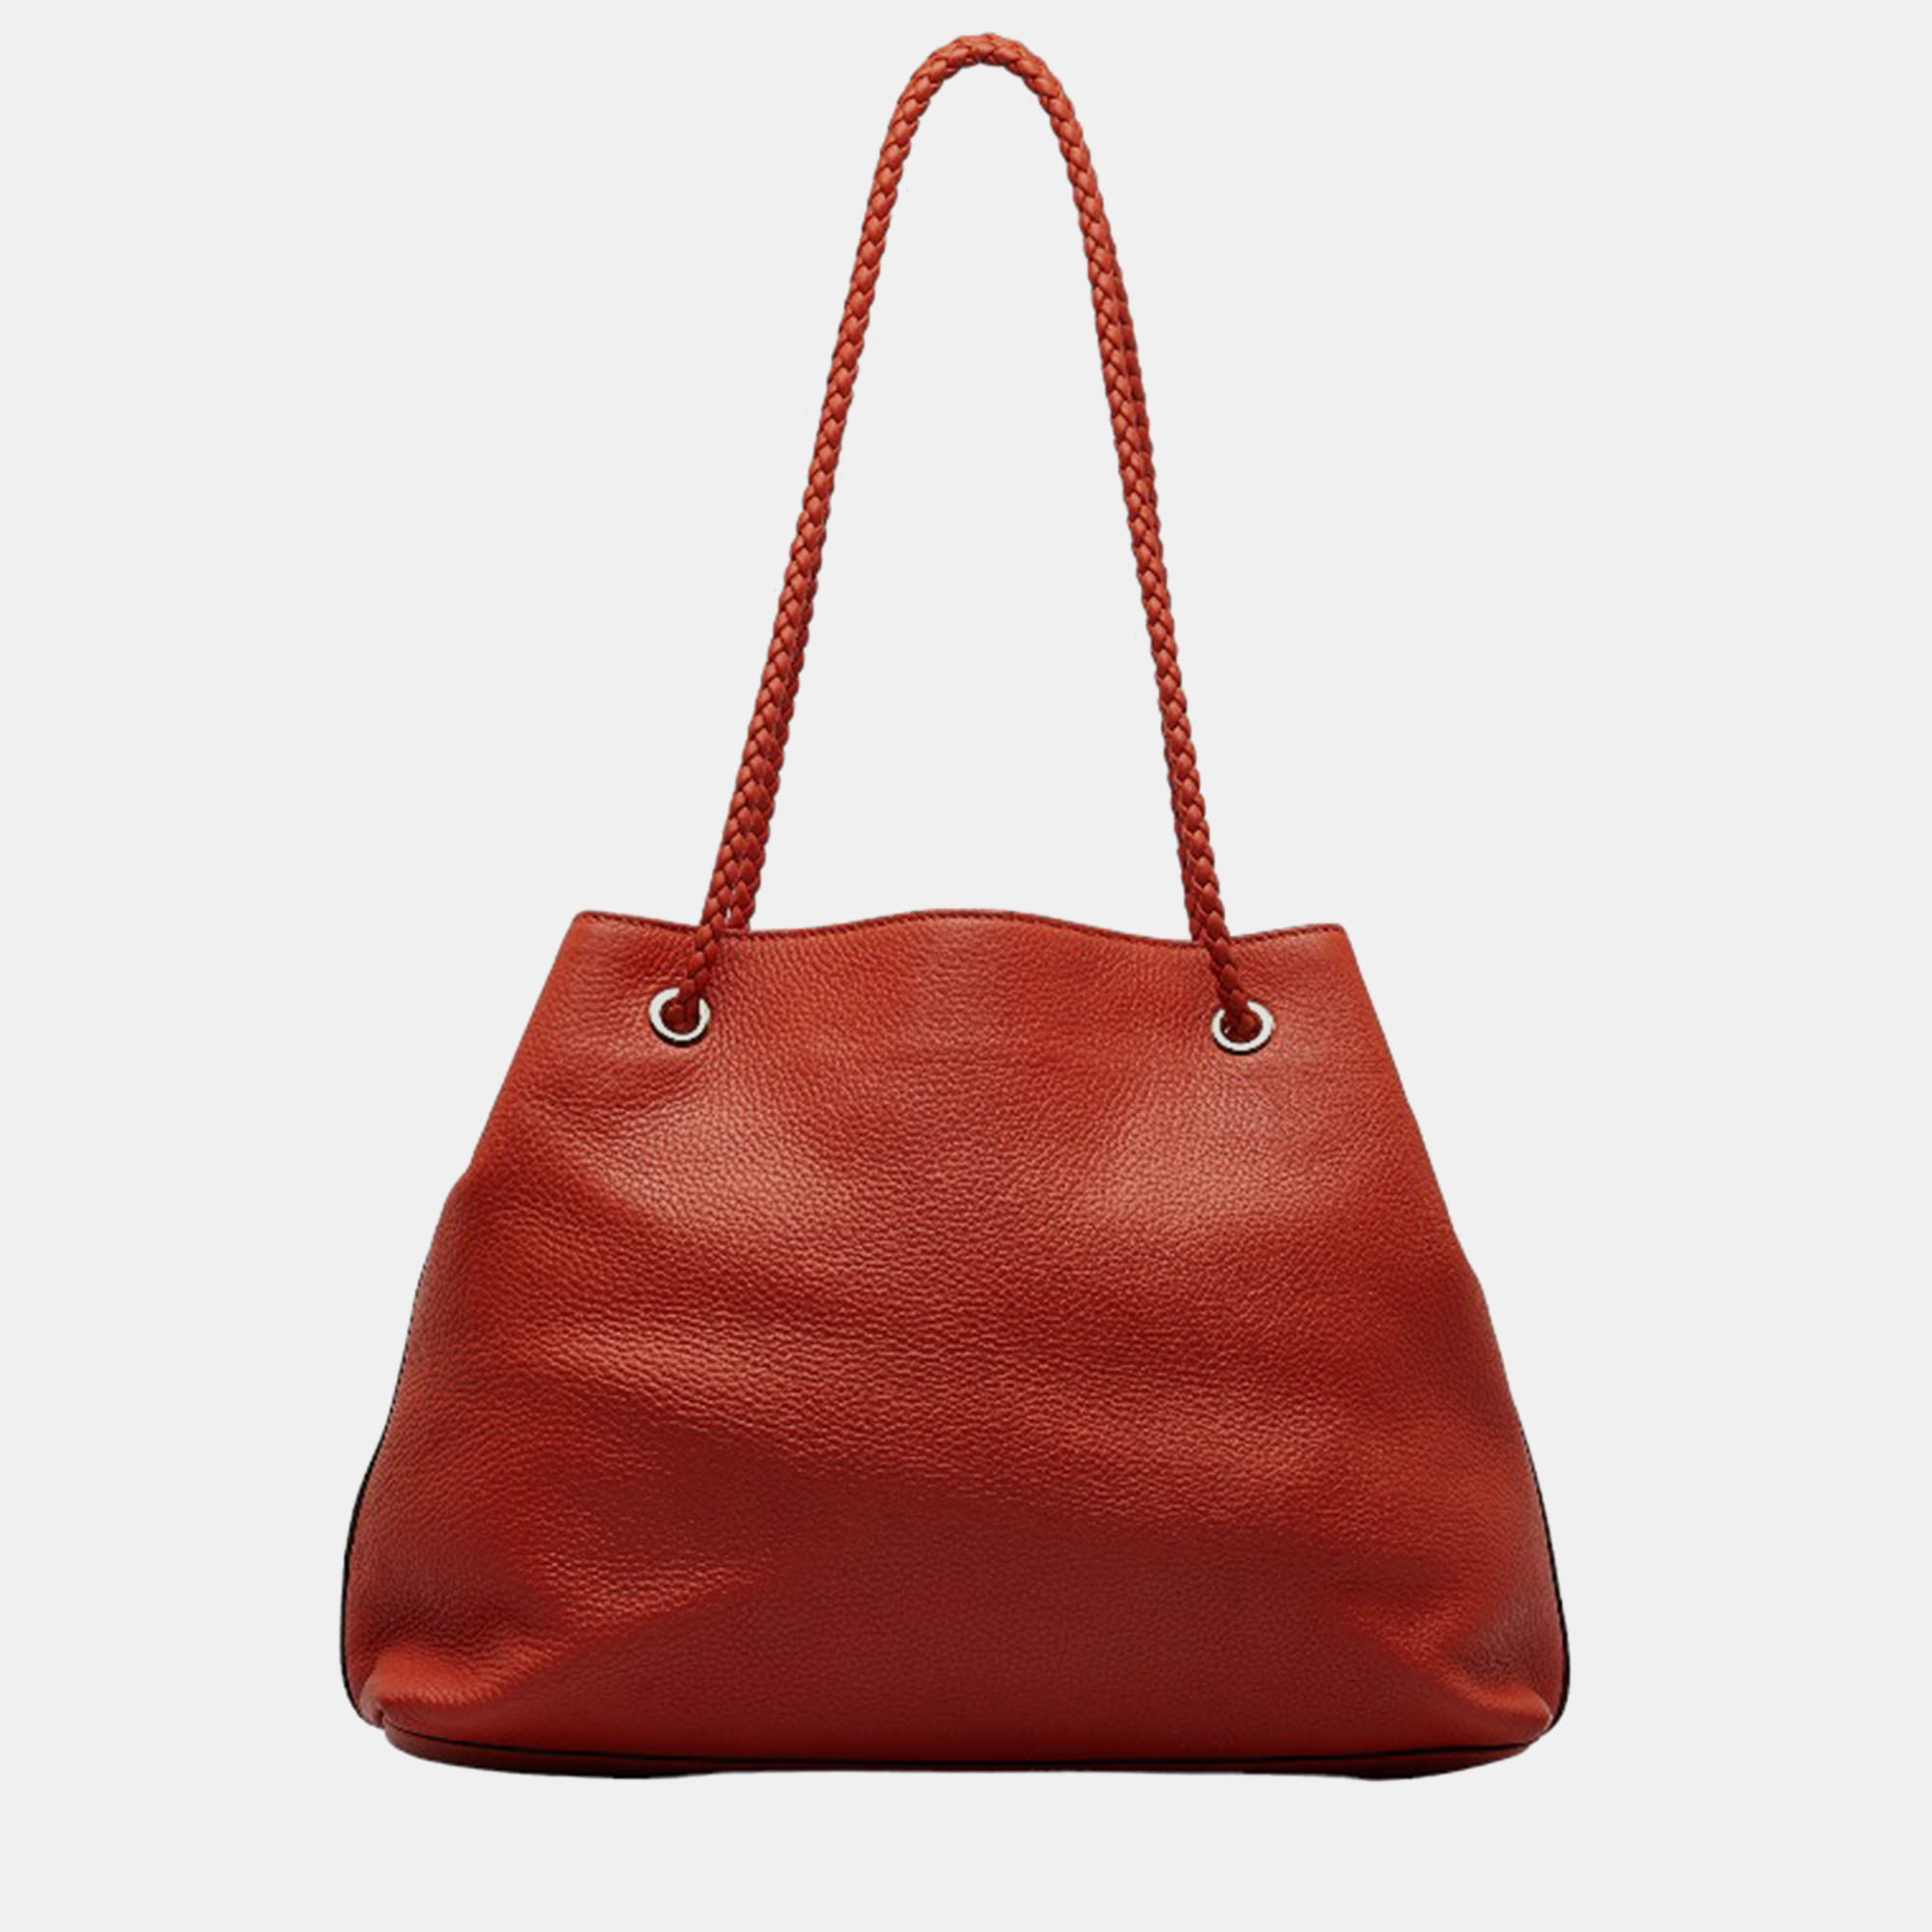 Gucci Red Leather Tote Bag